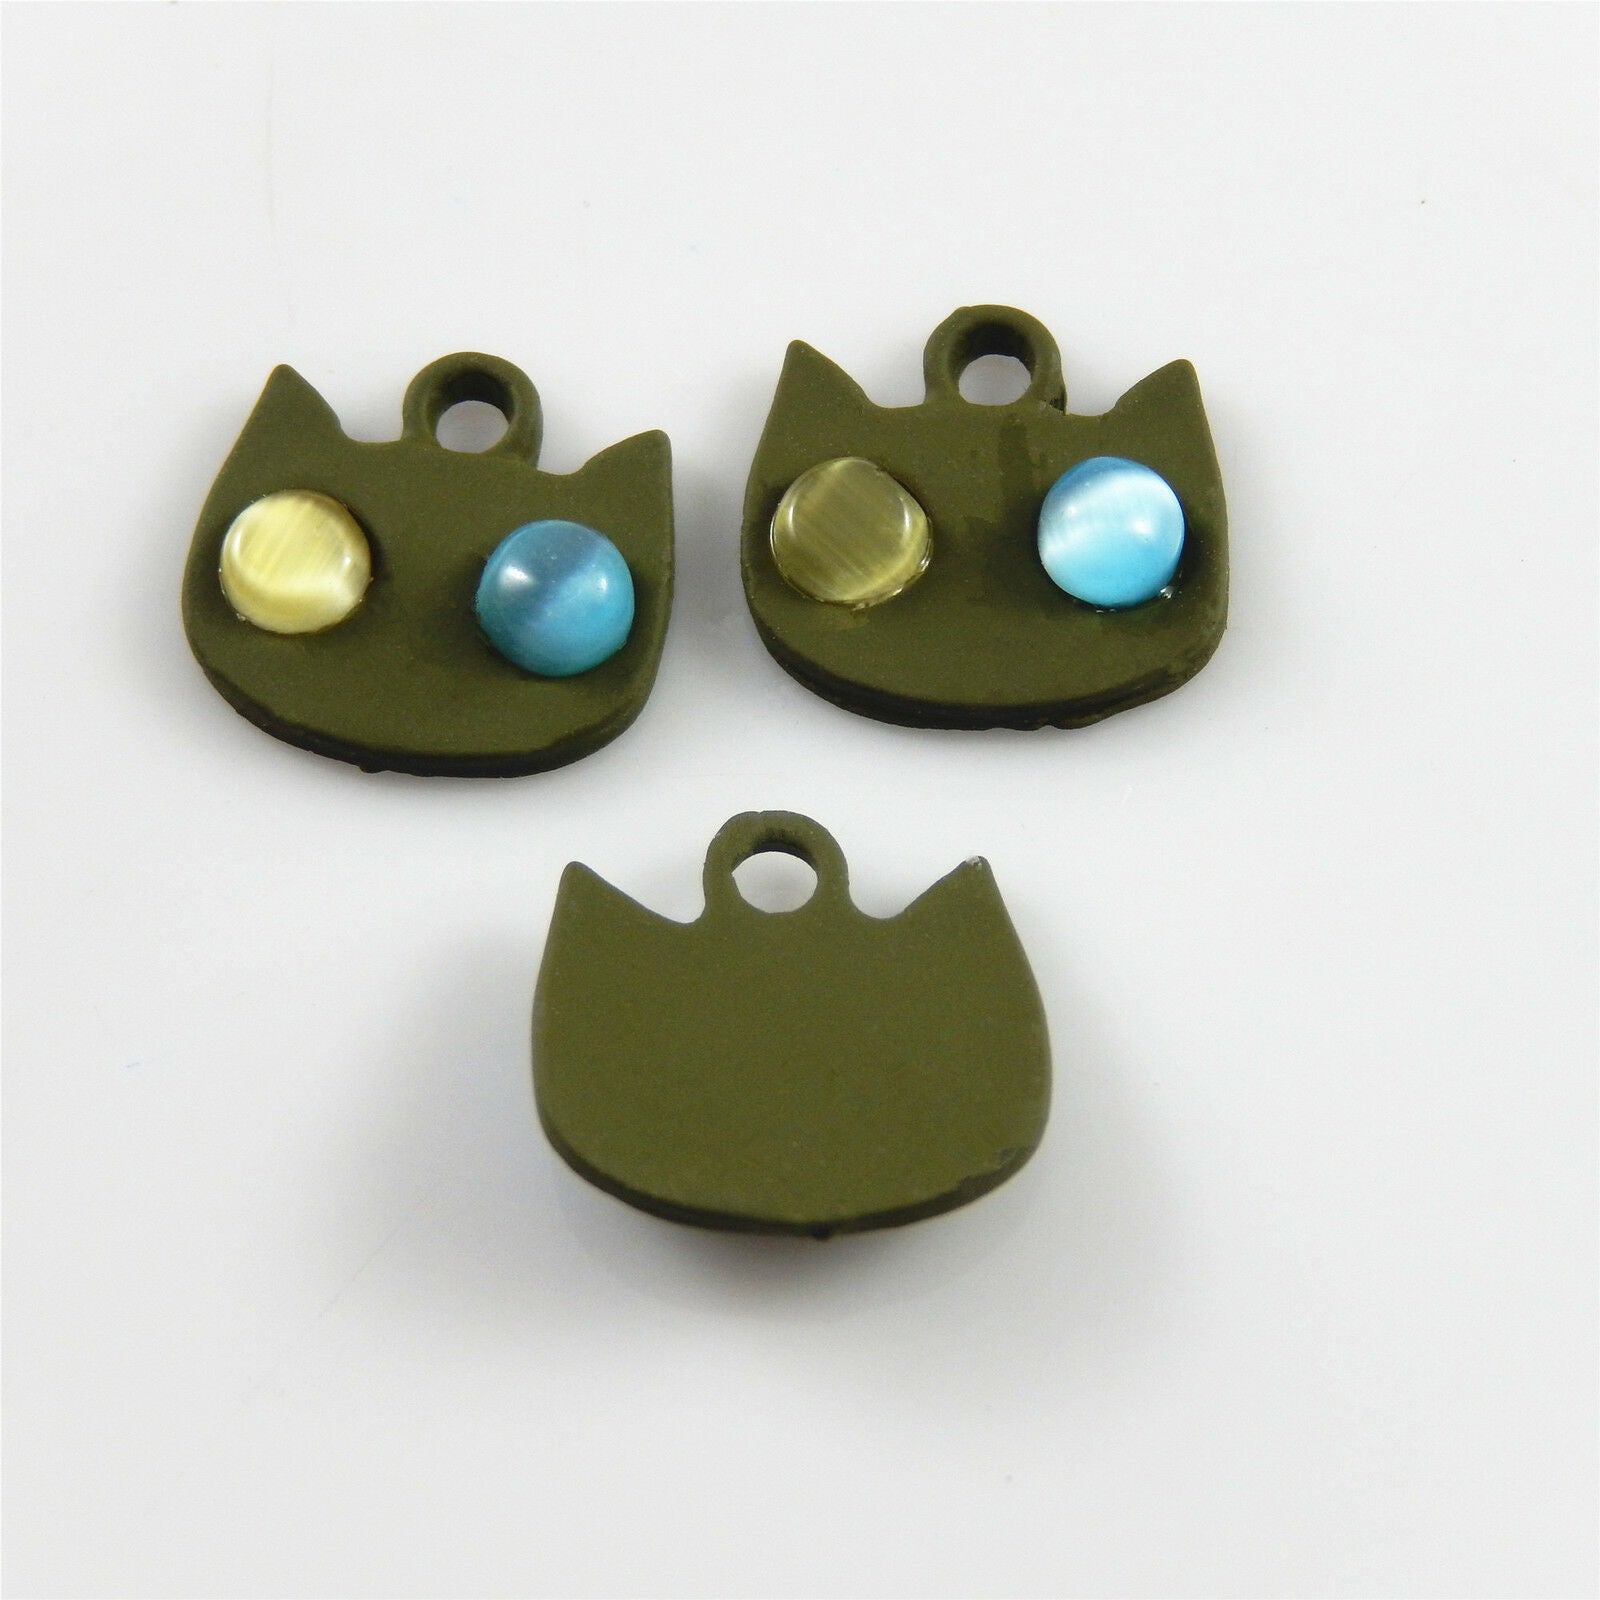 10 pcs Matte Green Cat Head Charm Pendant Jewelry Crafts Alloy Frosted 13*13*4mm